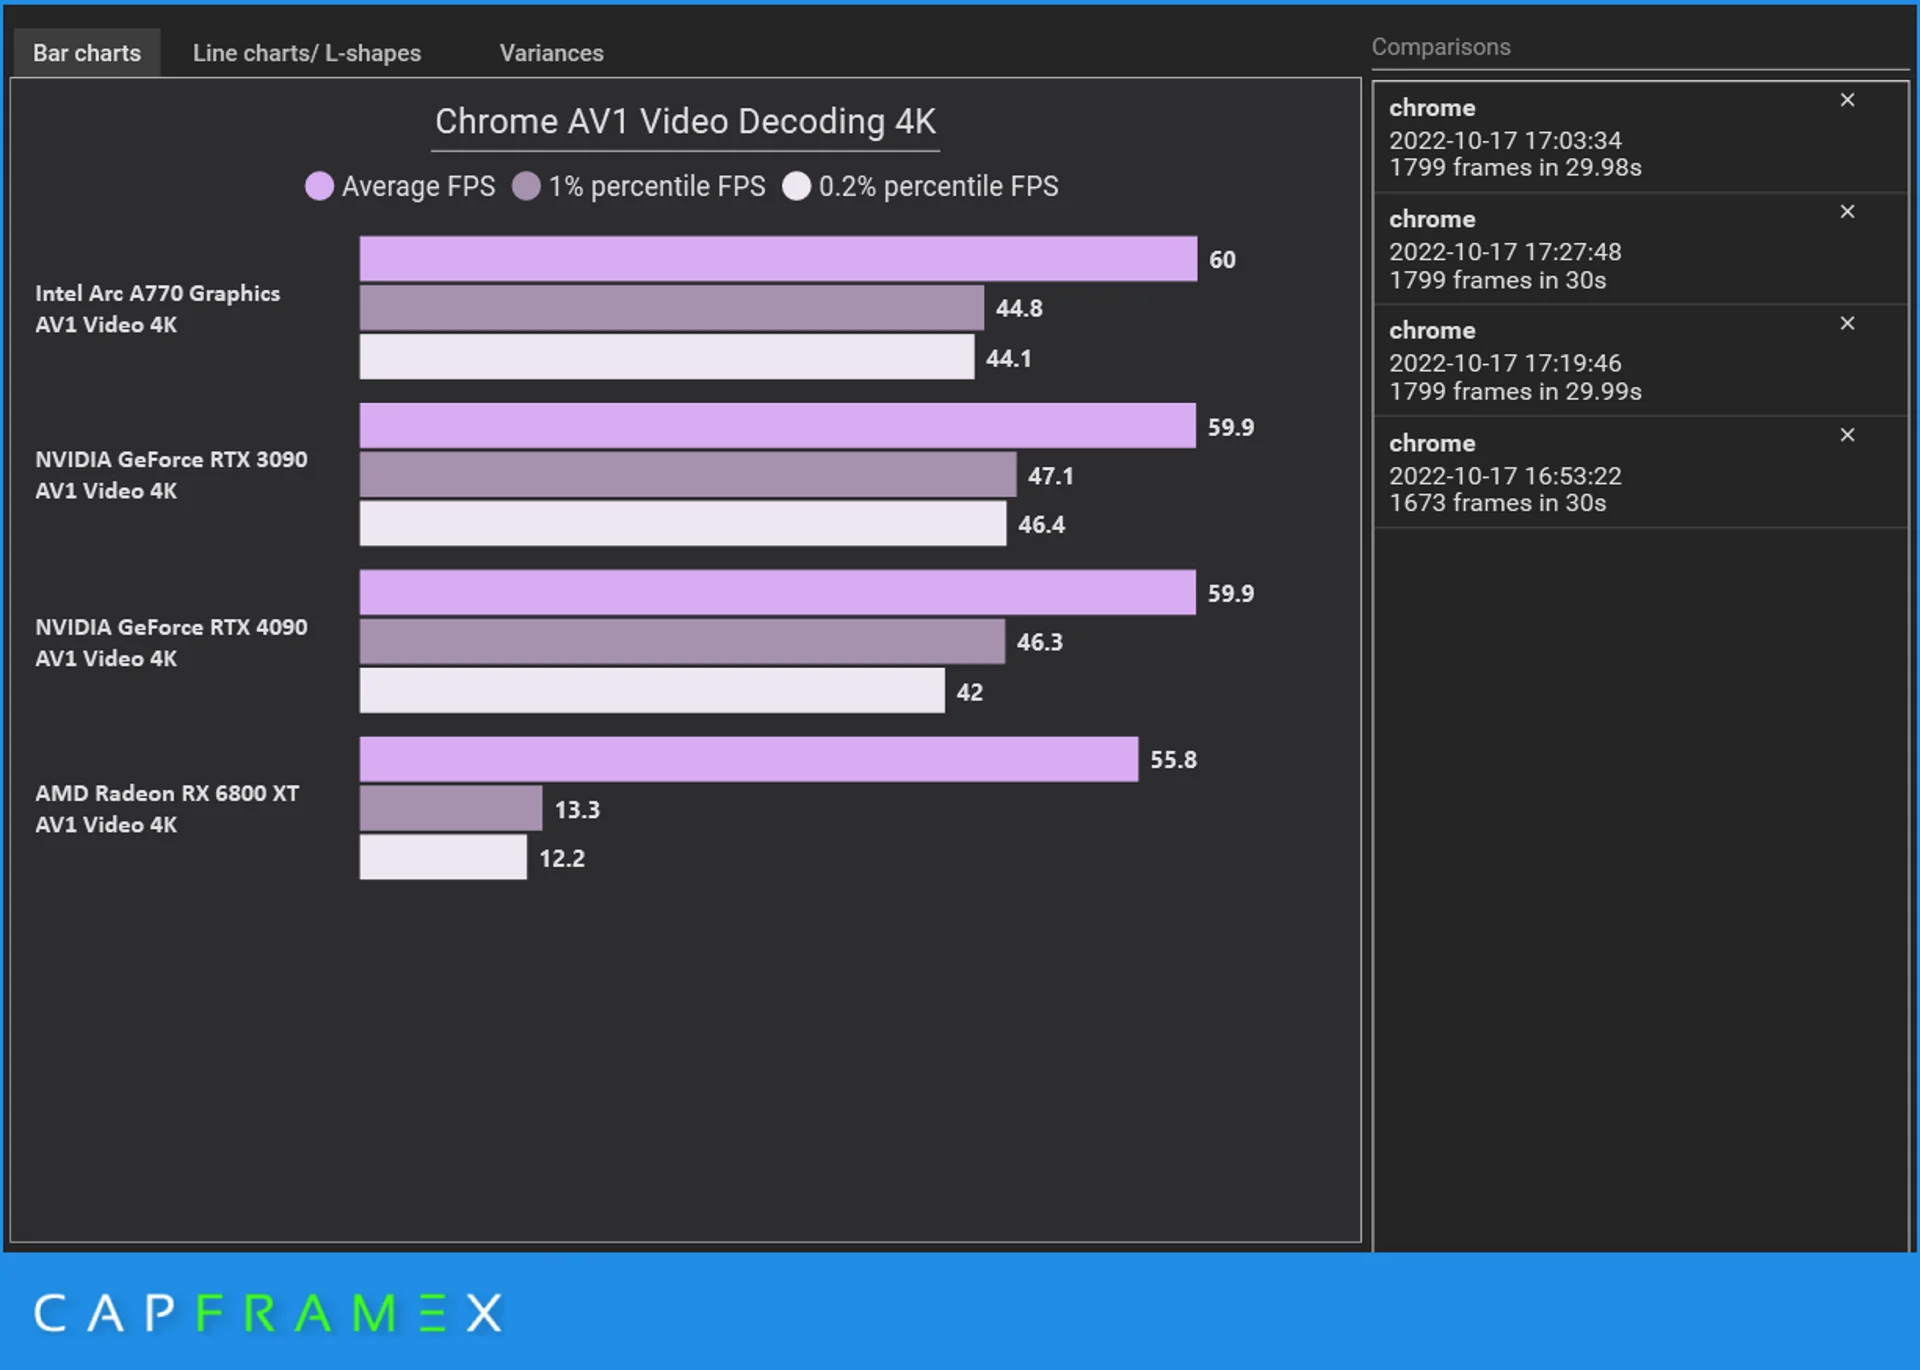 It turned out that the Intel Arc A770 outperforms the NVIDIA GeForce RTX 4090 in a number of scenarios